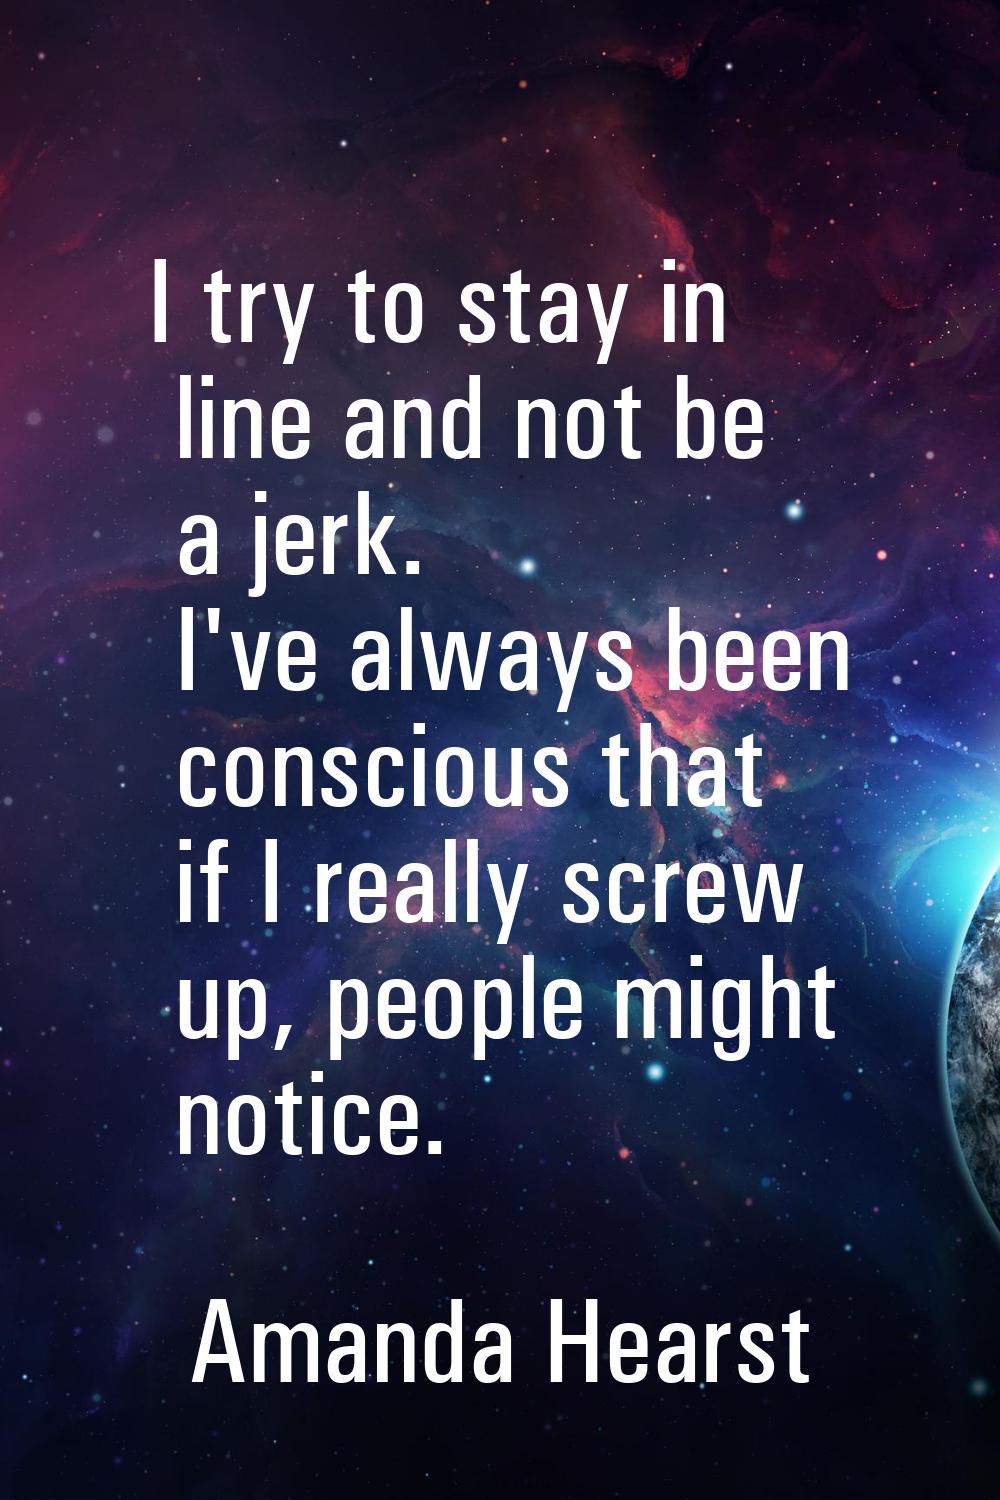 I try to stay in line and not be a jerk. I've always been conscious that if I really screw up, peop